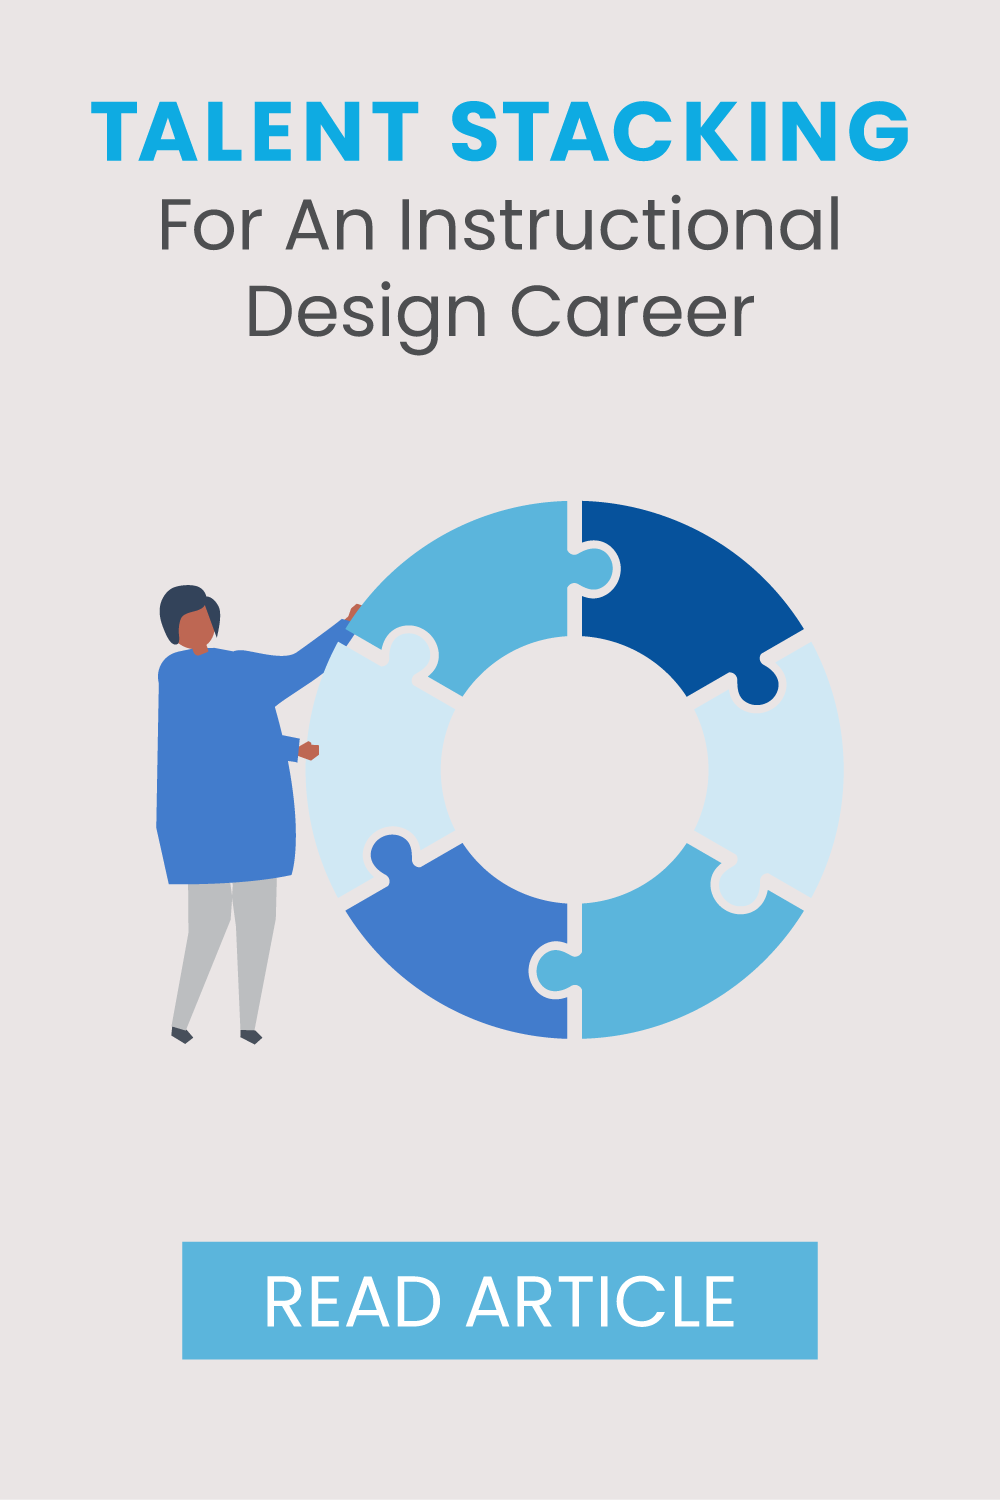 Talent Stacking For An Instructional Design Career